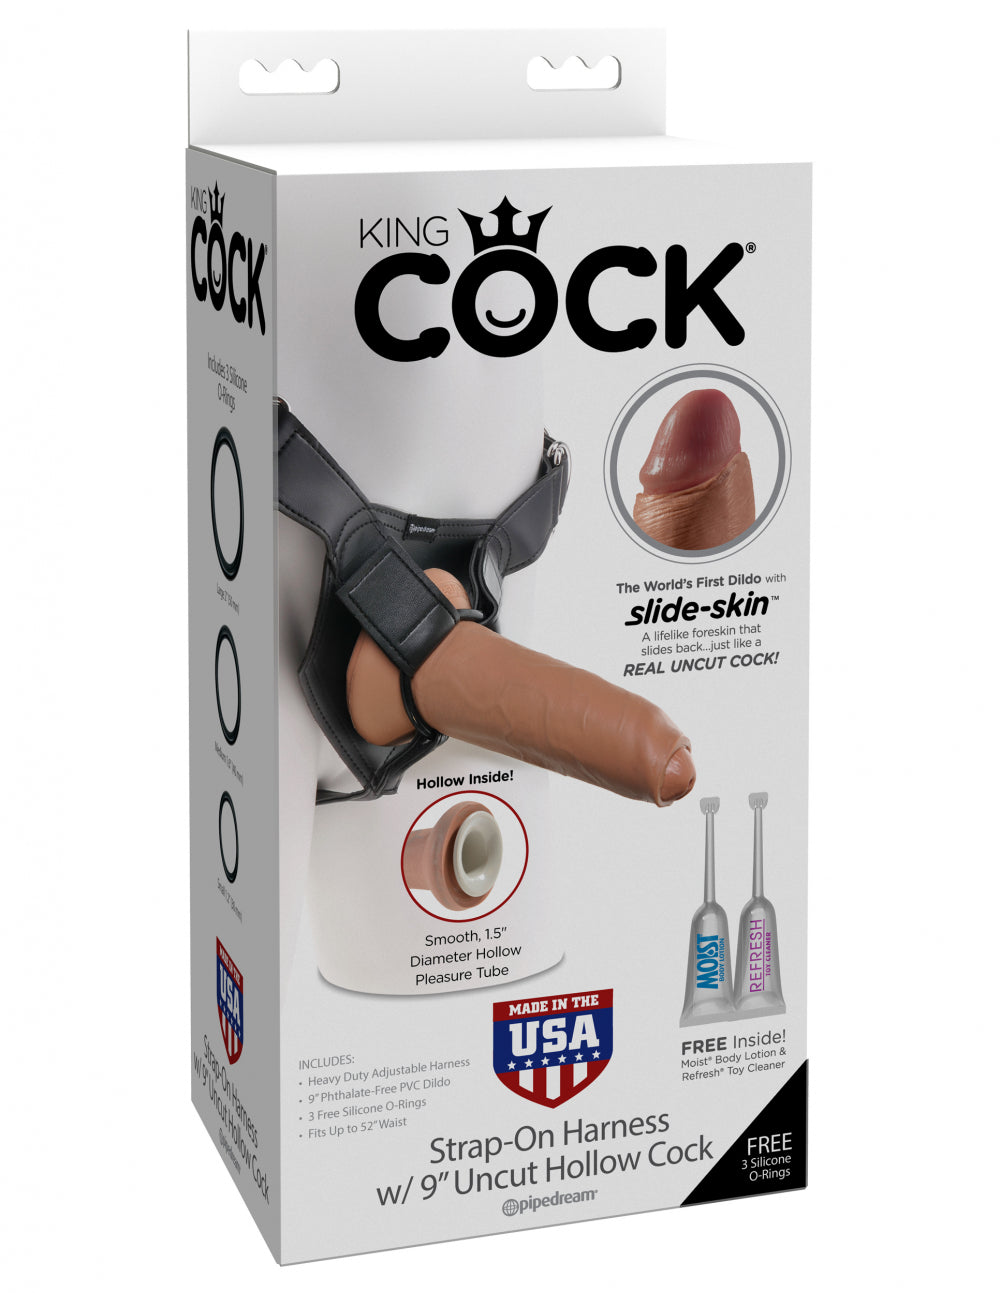 Strap-On Harness  w/ 9" Uncut Hollow Cock by King Cock